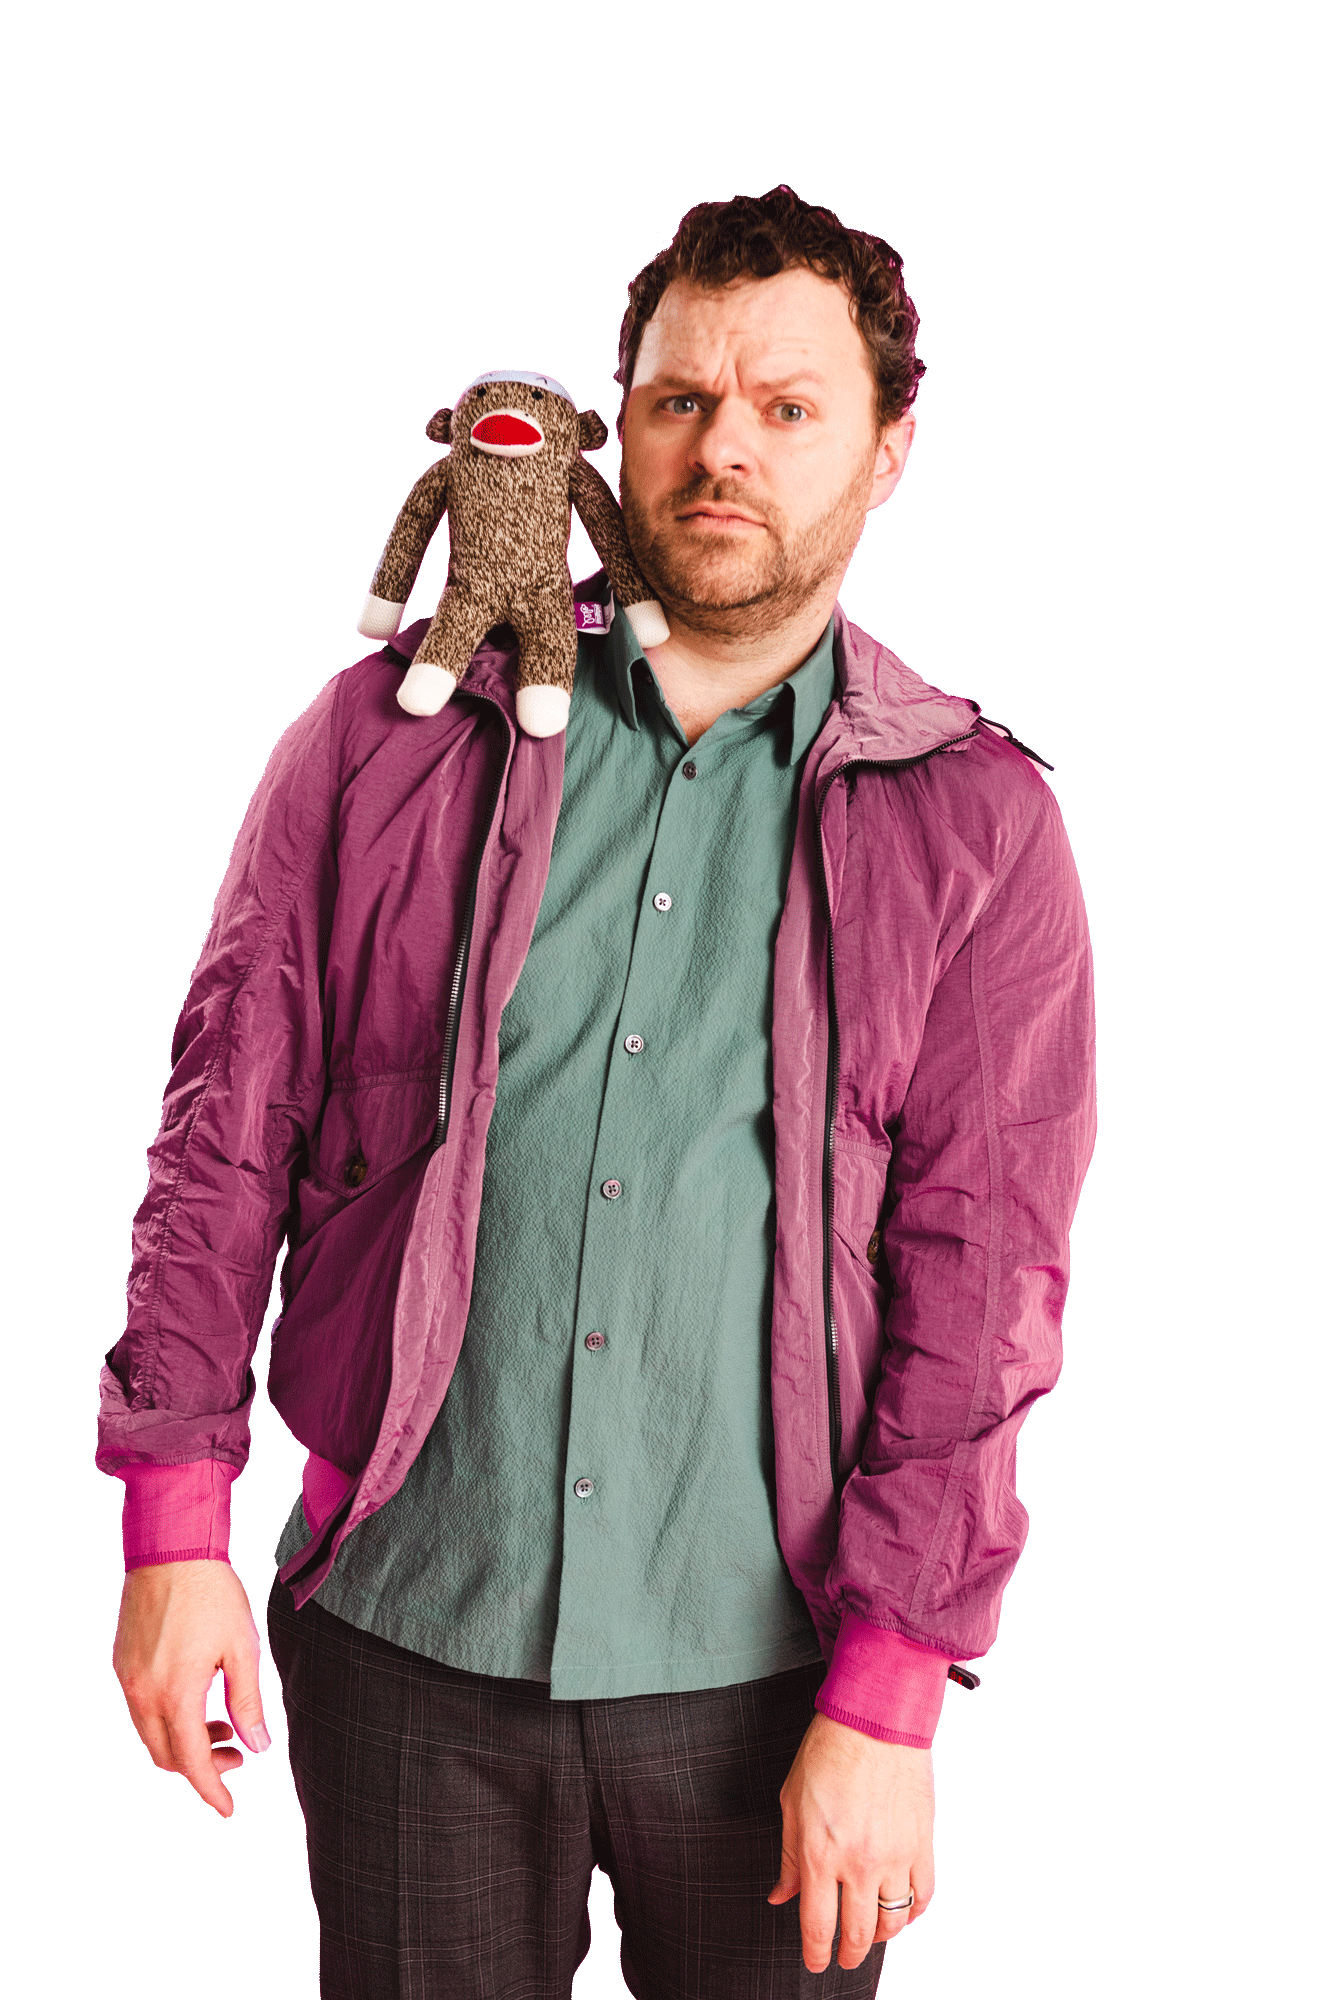 Sean Bott headshot, being silly with a monkey on his shoulder